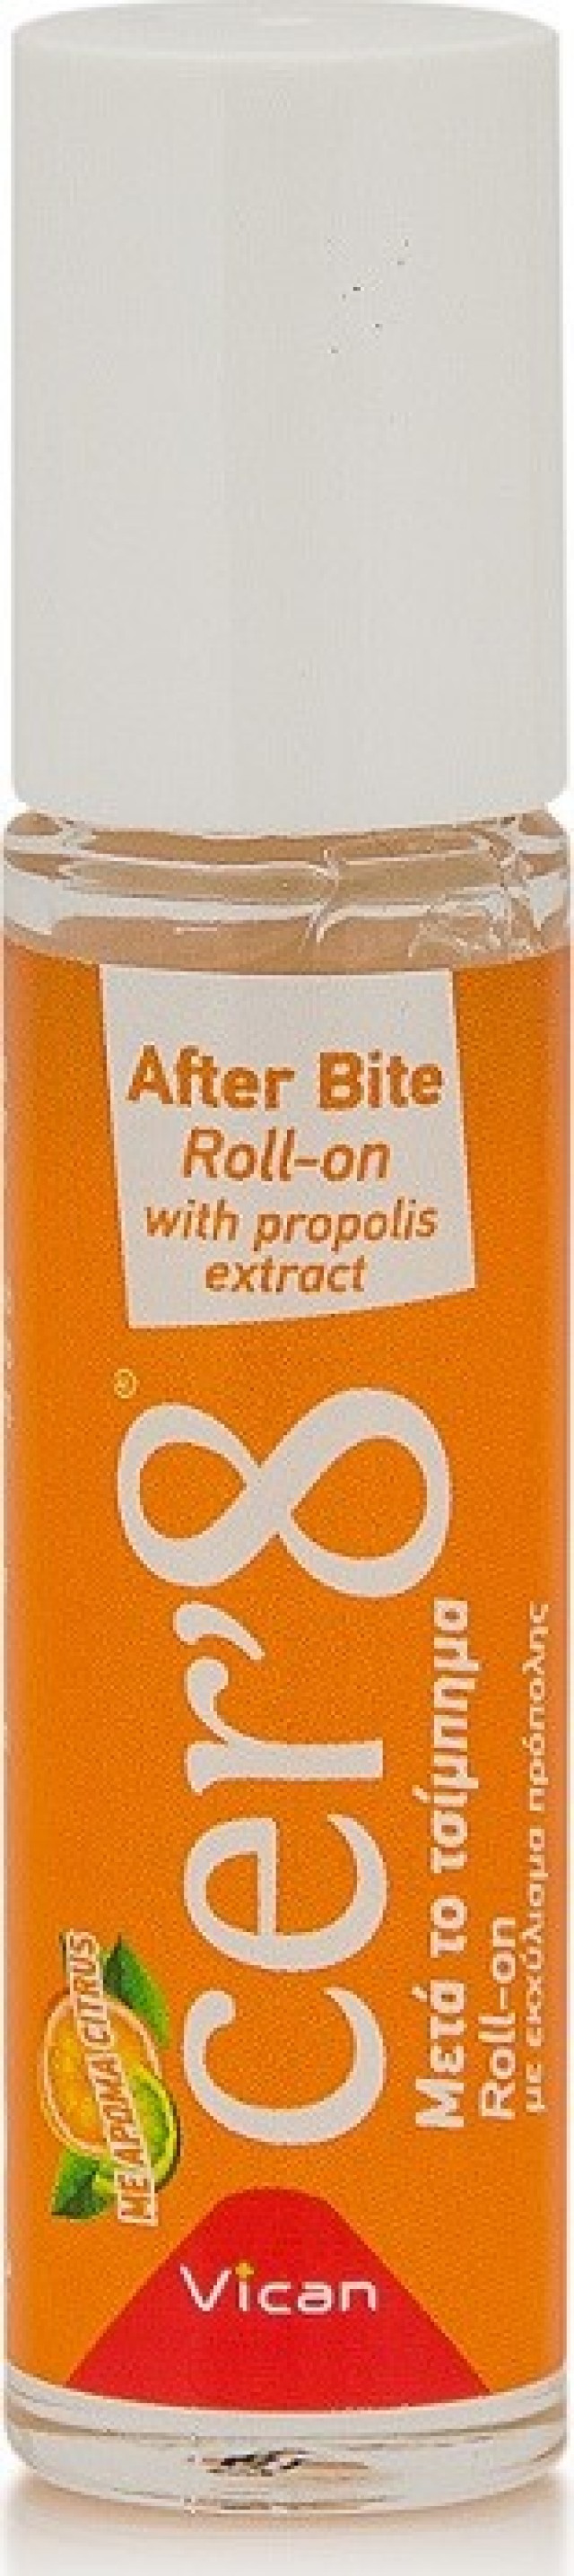 Vican Cer8 After Bite Roll-On για Μετά το Τσίμπημα 10ml